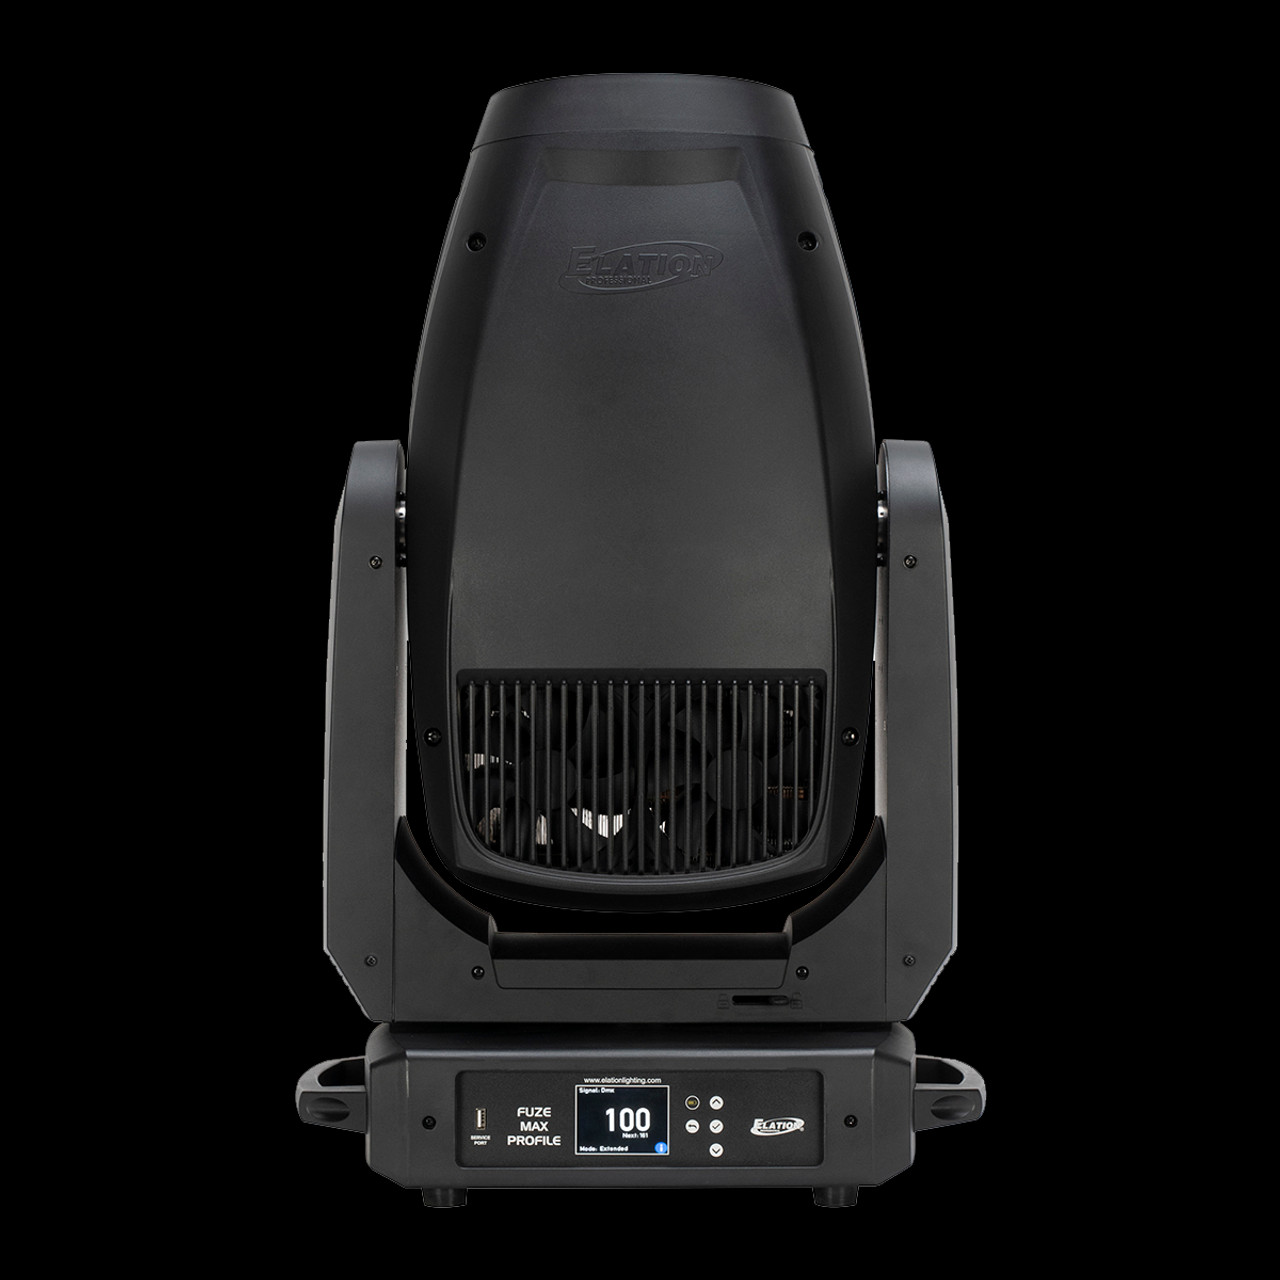 Elation Fuze MAX Profile RGBMA Full Color Specture LED Moving Head + Framing